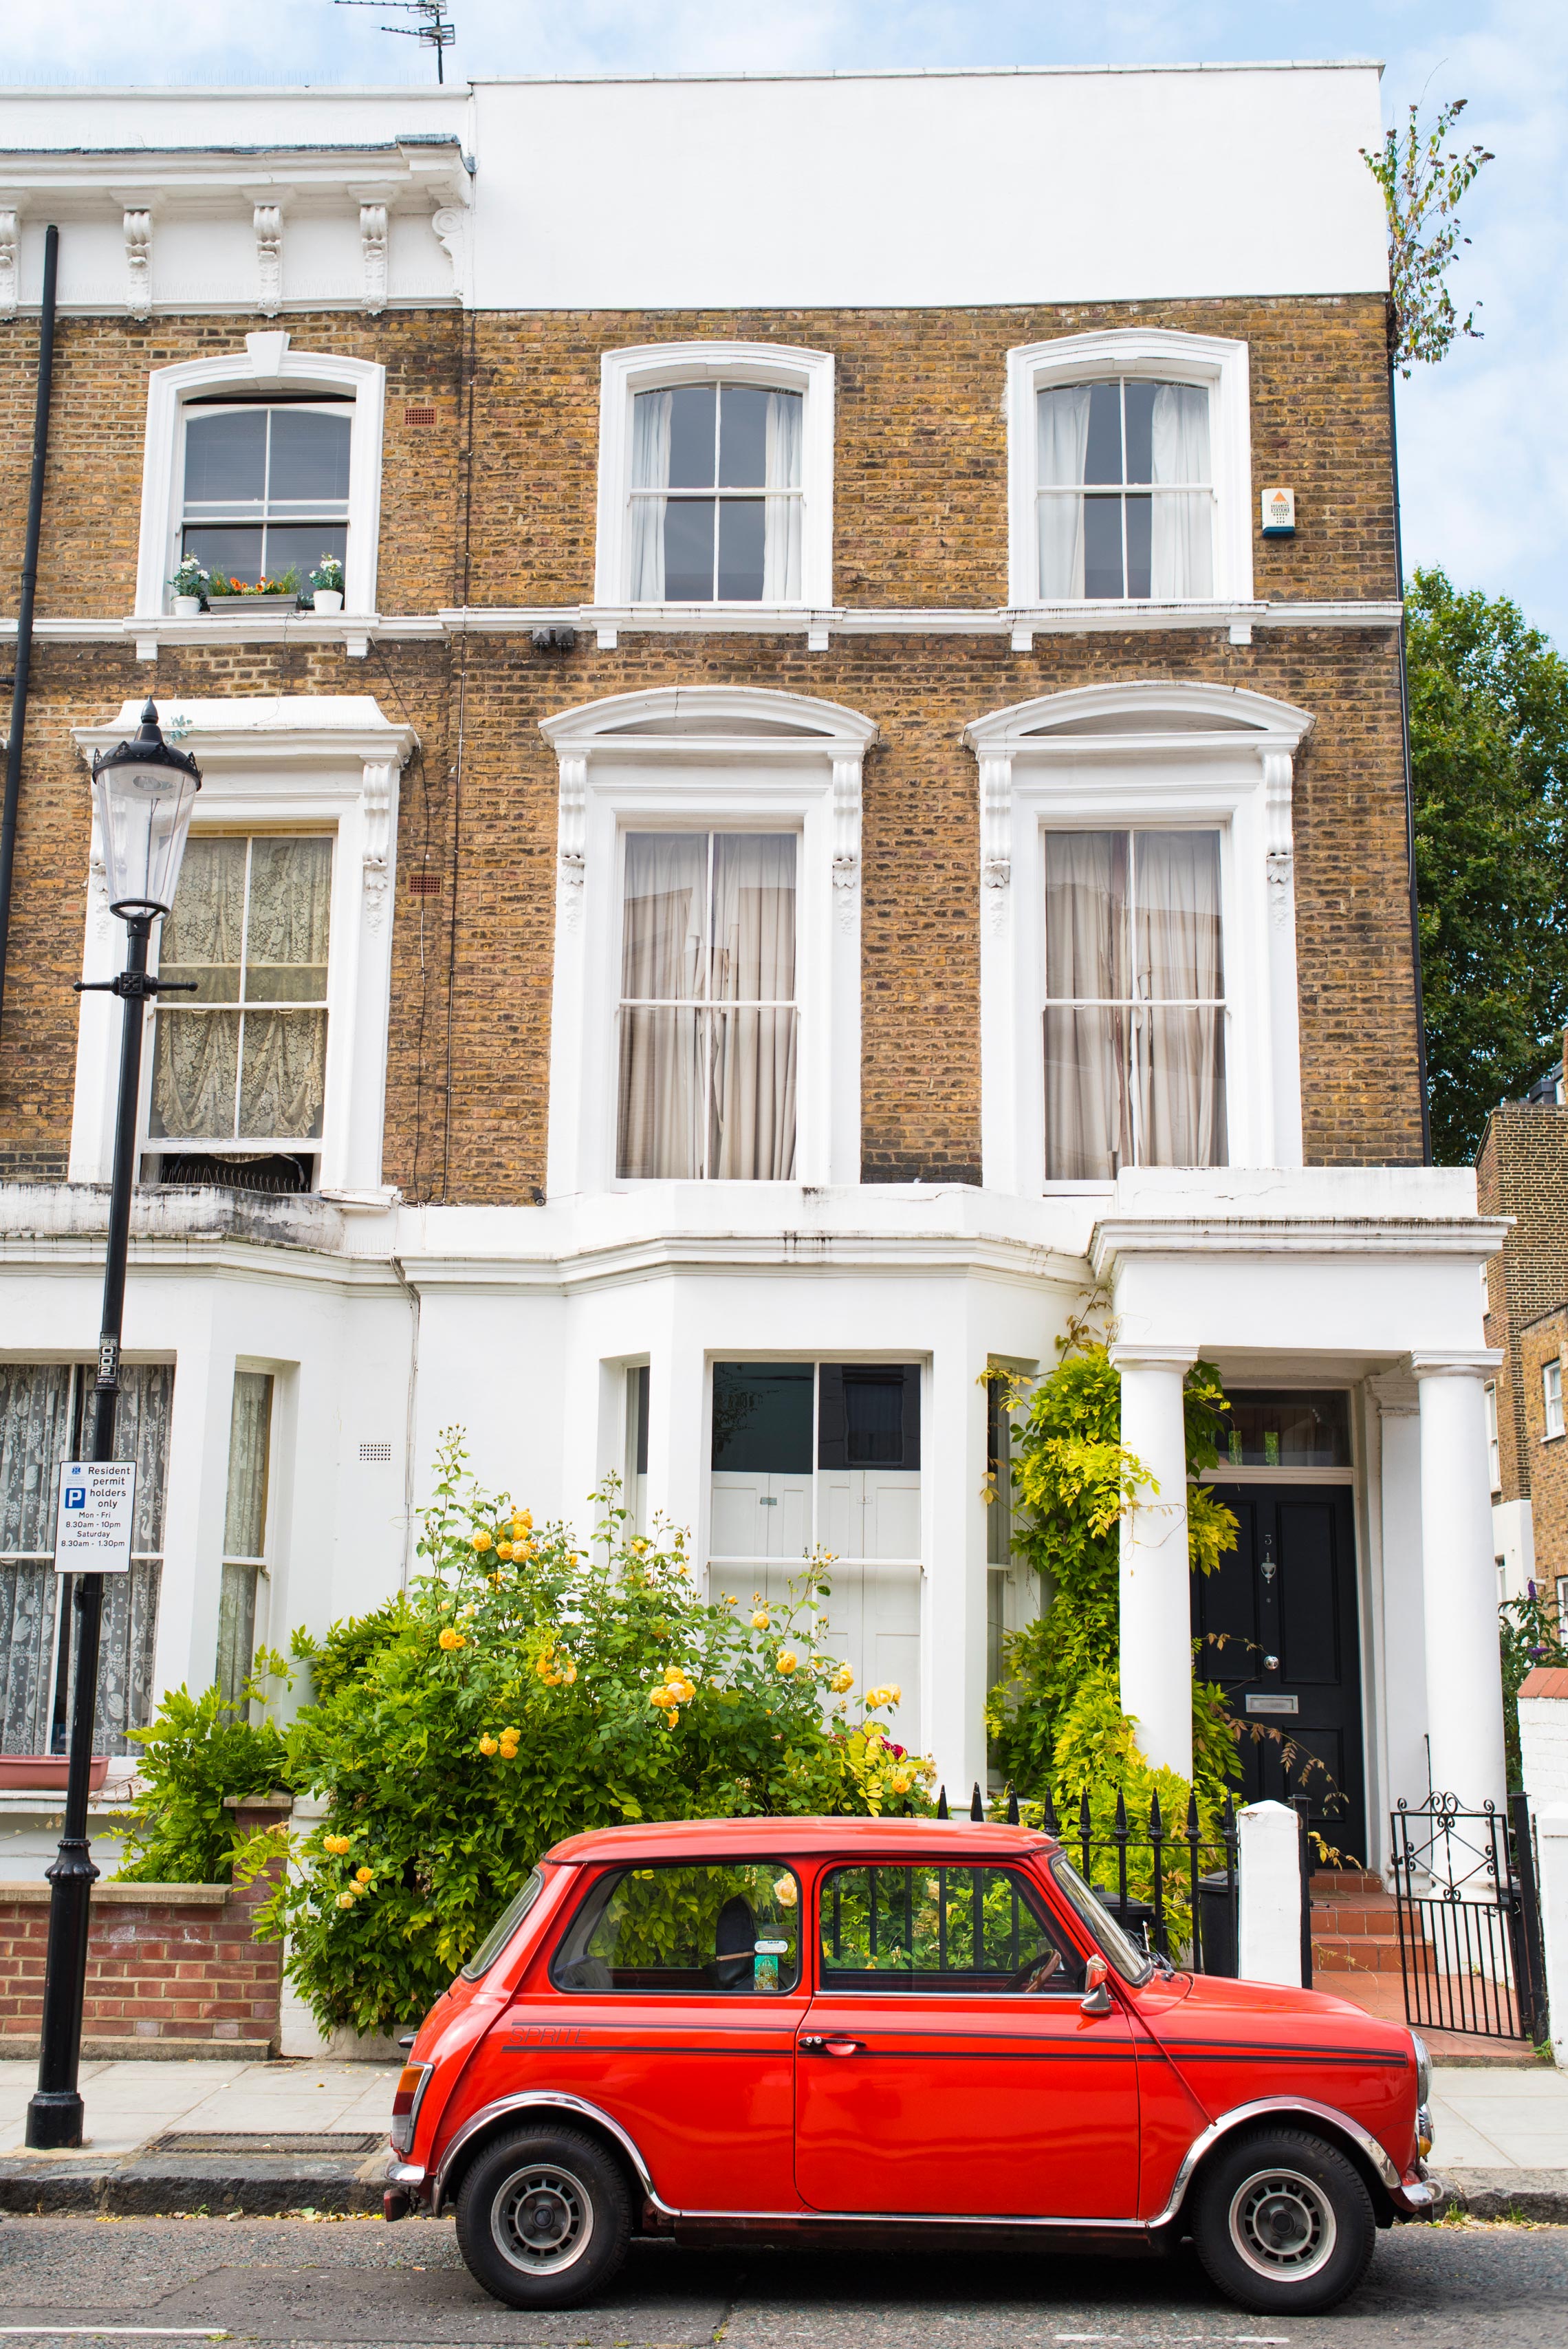 3 Days in London, Notting Hill